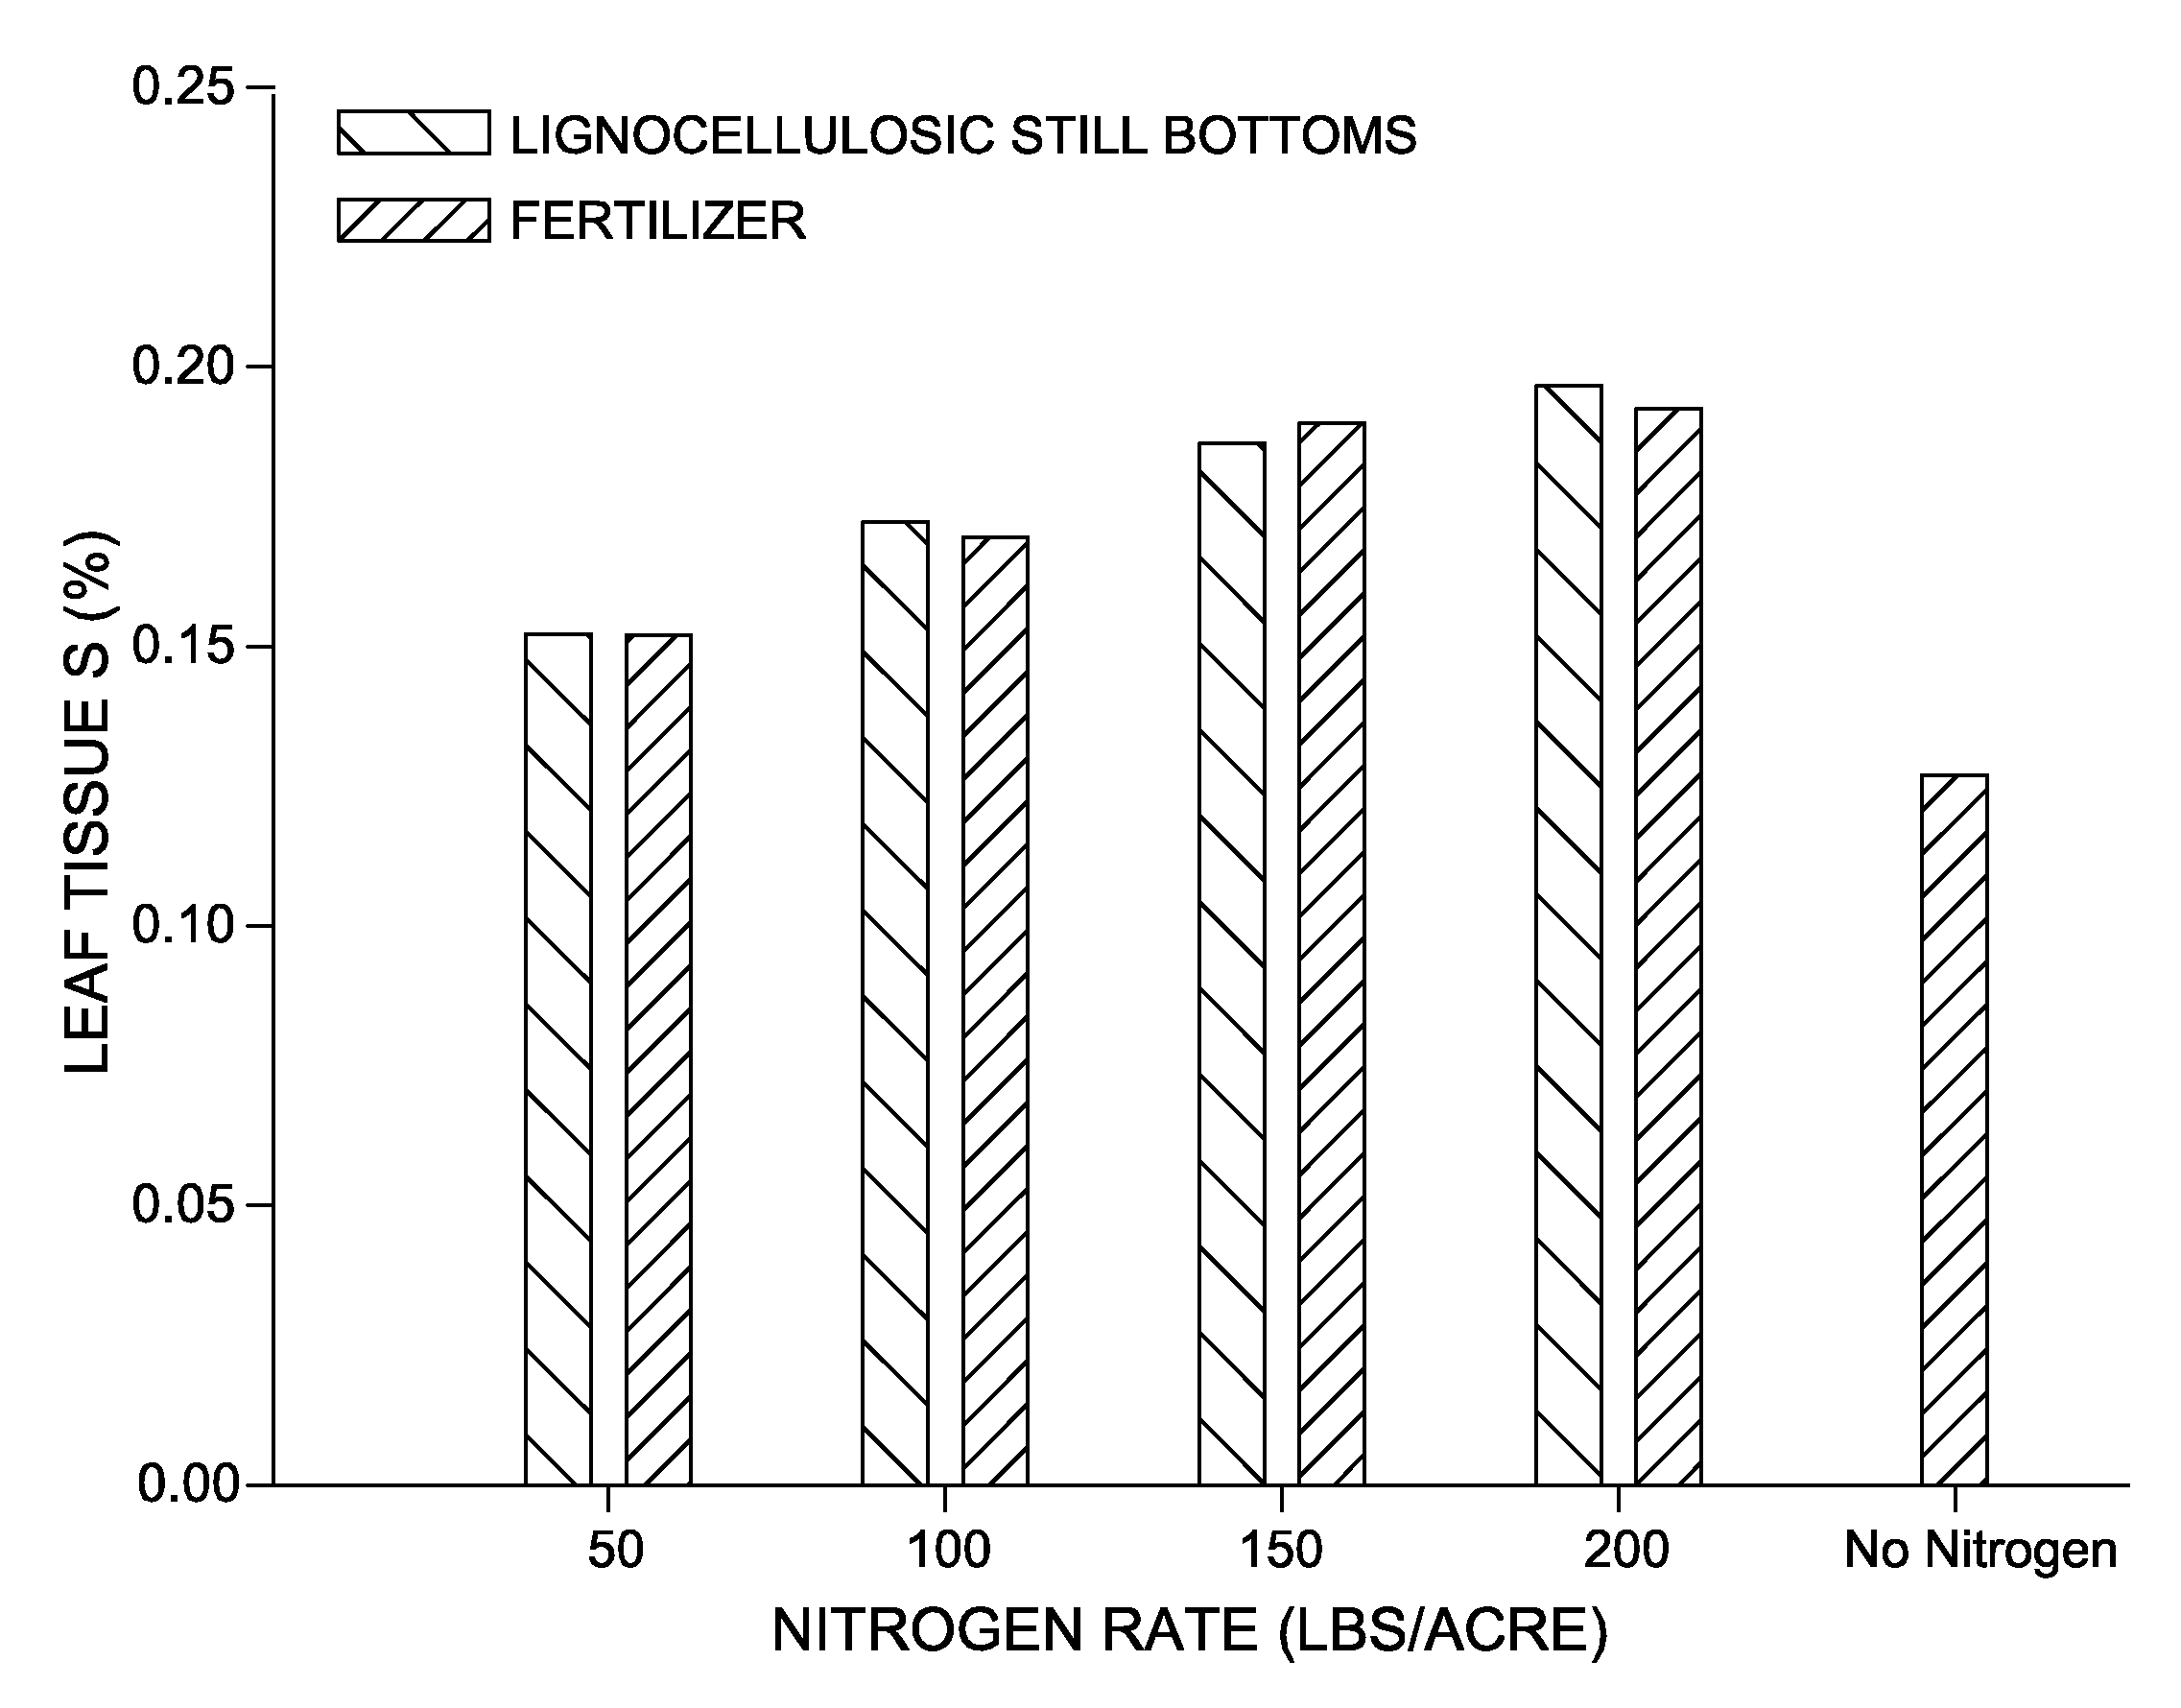 Method for producing a soil conditioning composition from a lignocellulosic conversion process